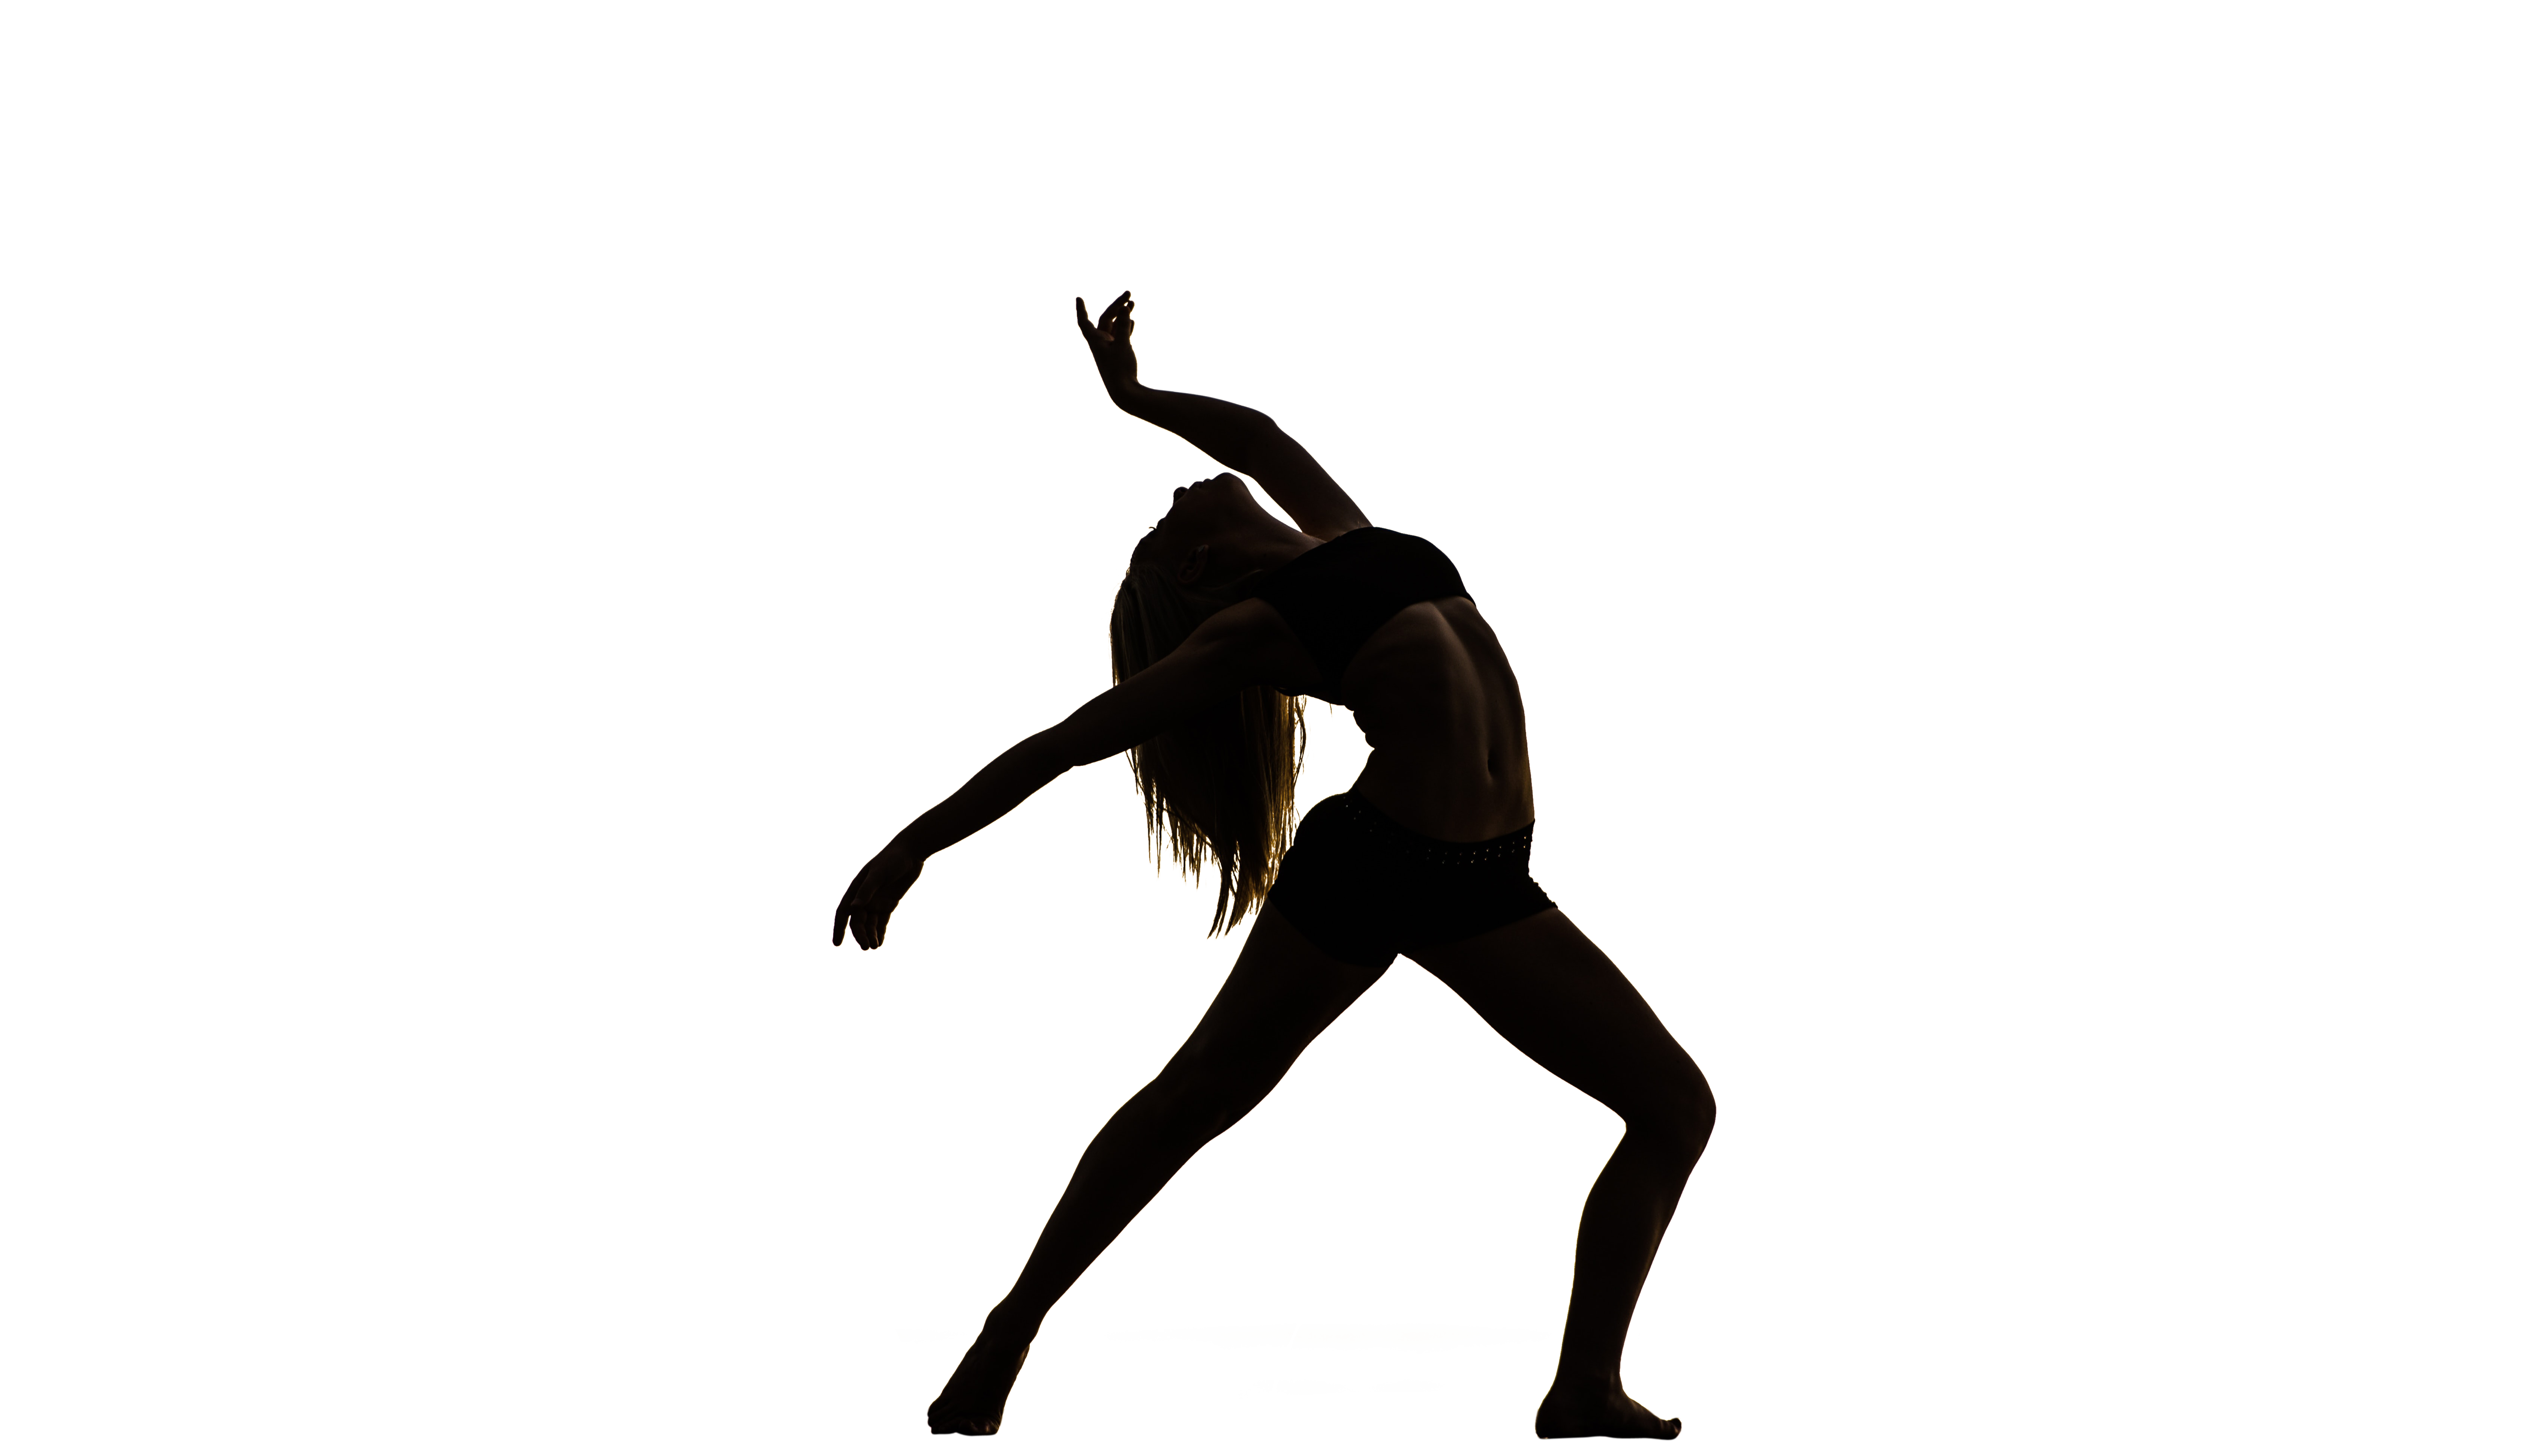 Dance pose, Dance pose png, Dance pose PNG image, transparent Dance pose png image, Dance pose png full hd images download